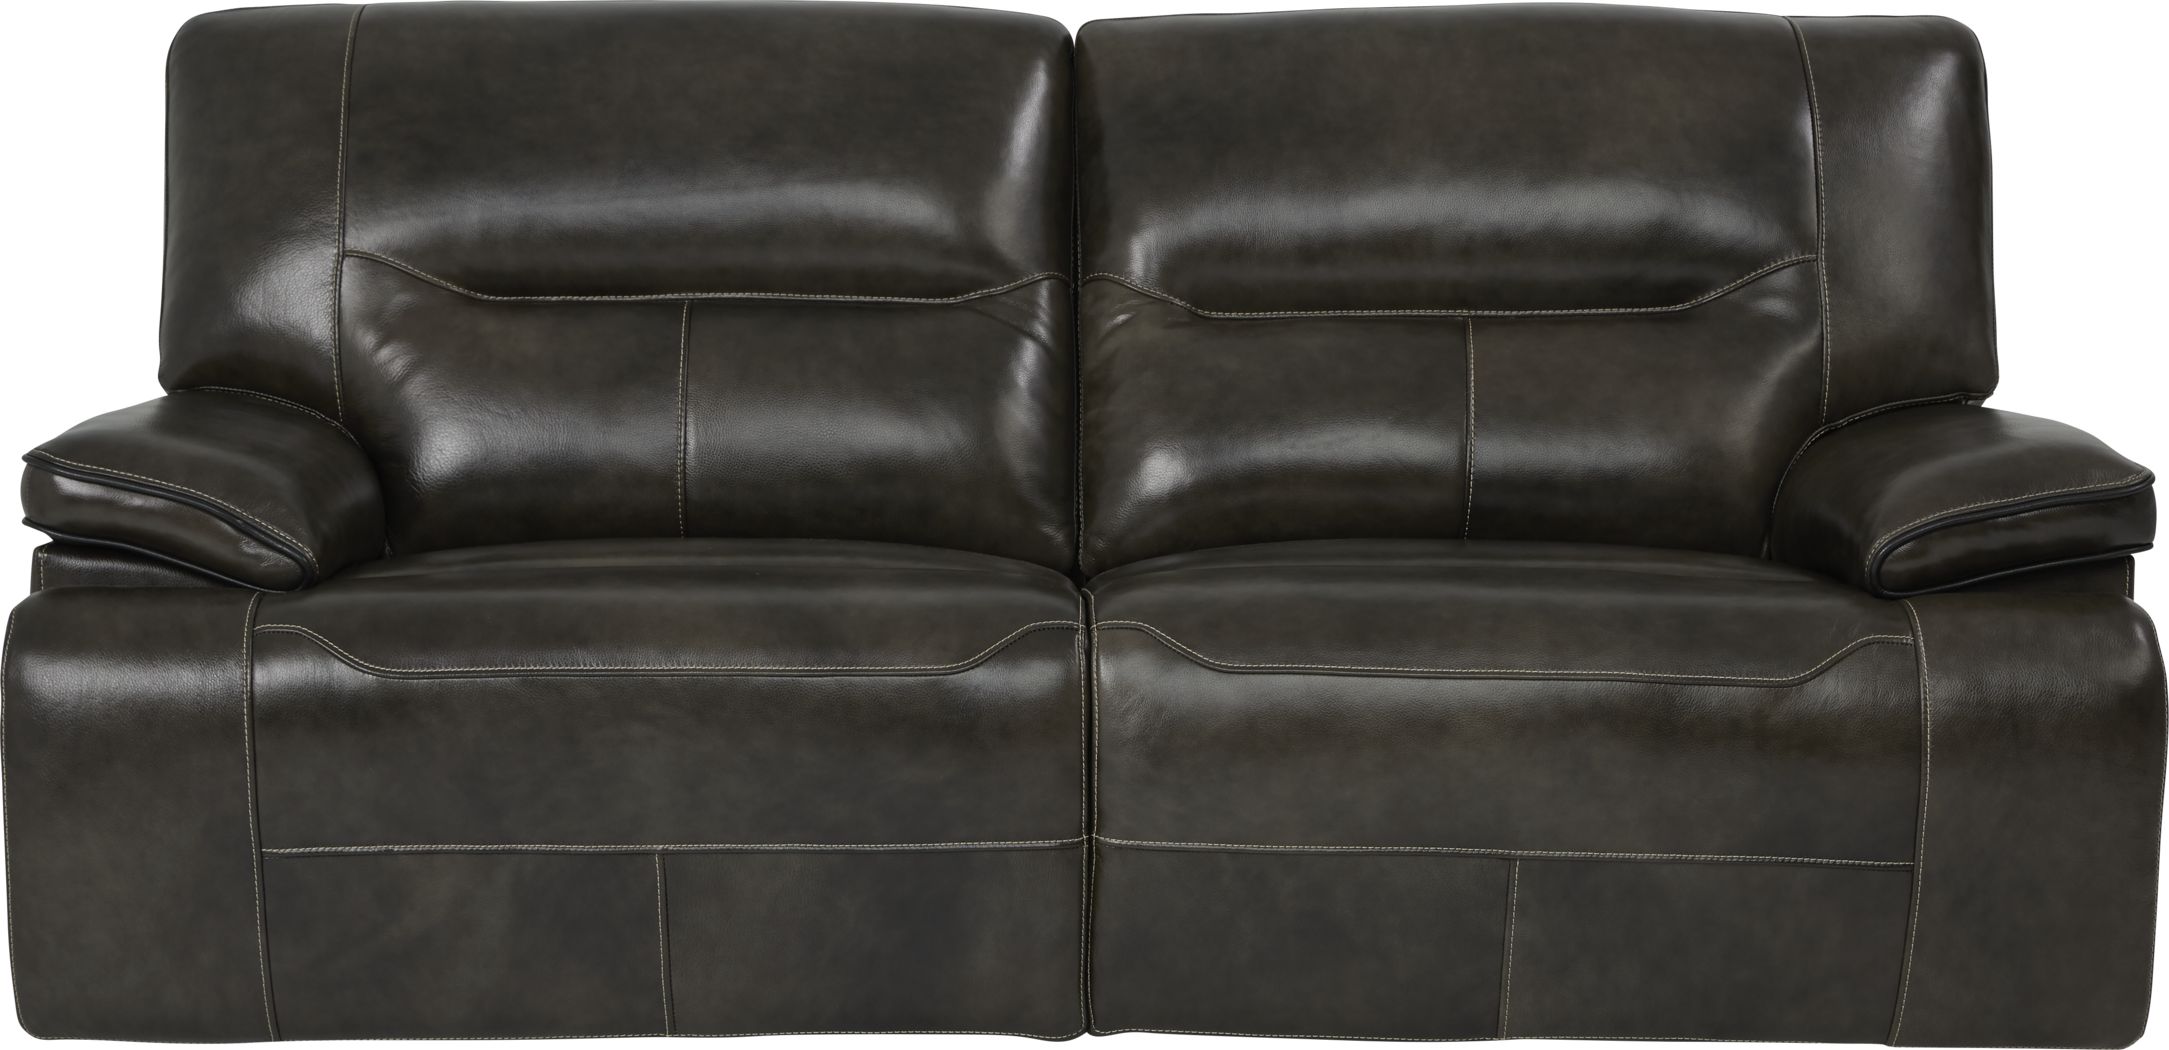 Cindy Crawford Home Caletta Gray Leather Reclining Sofa